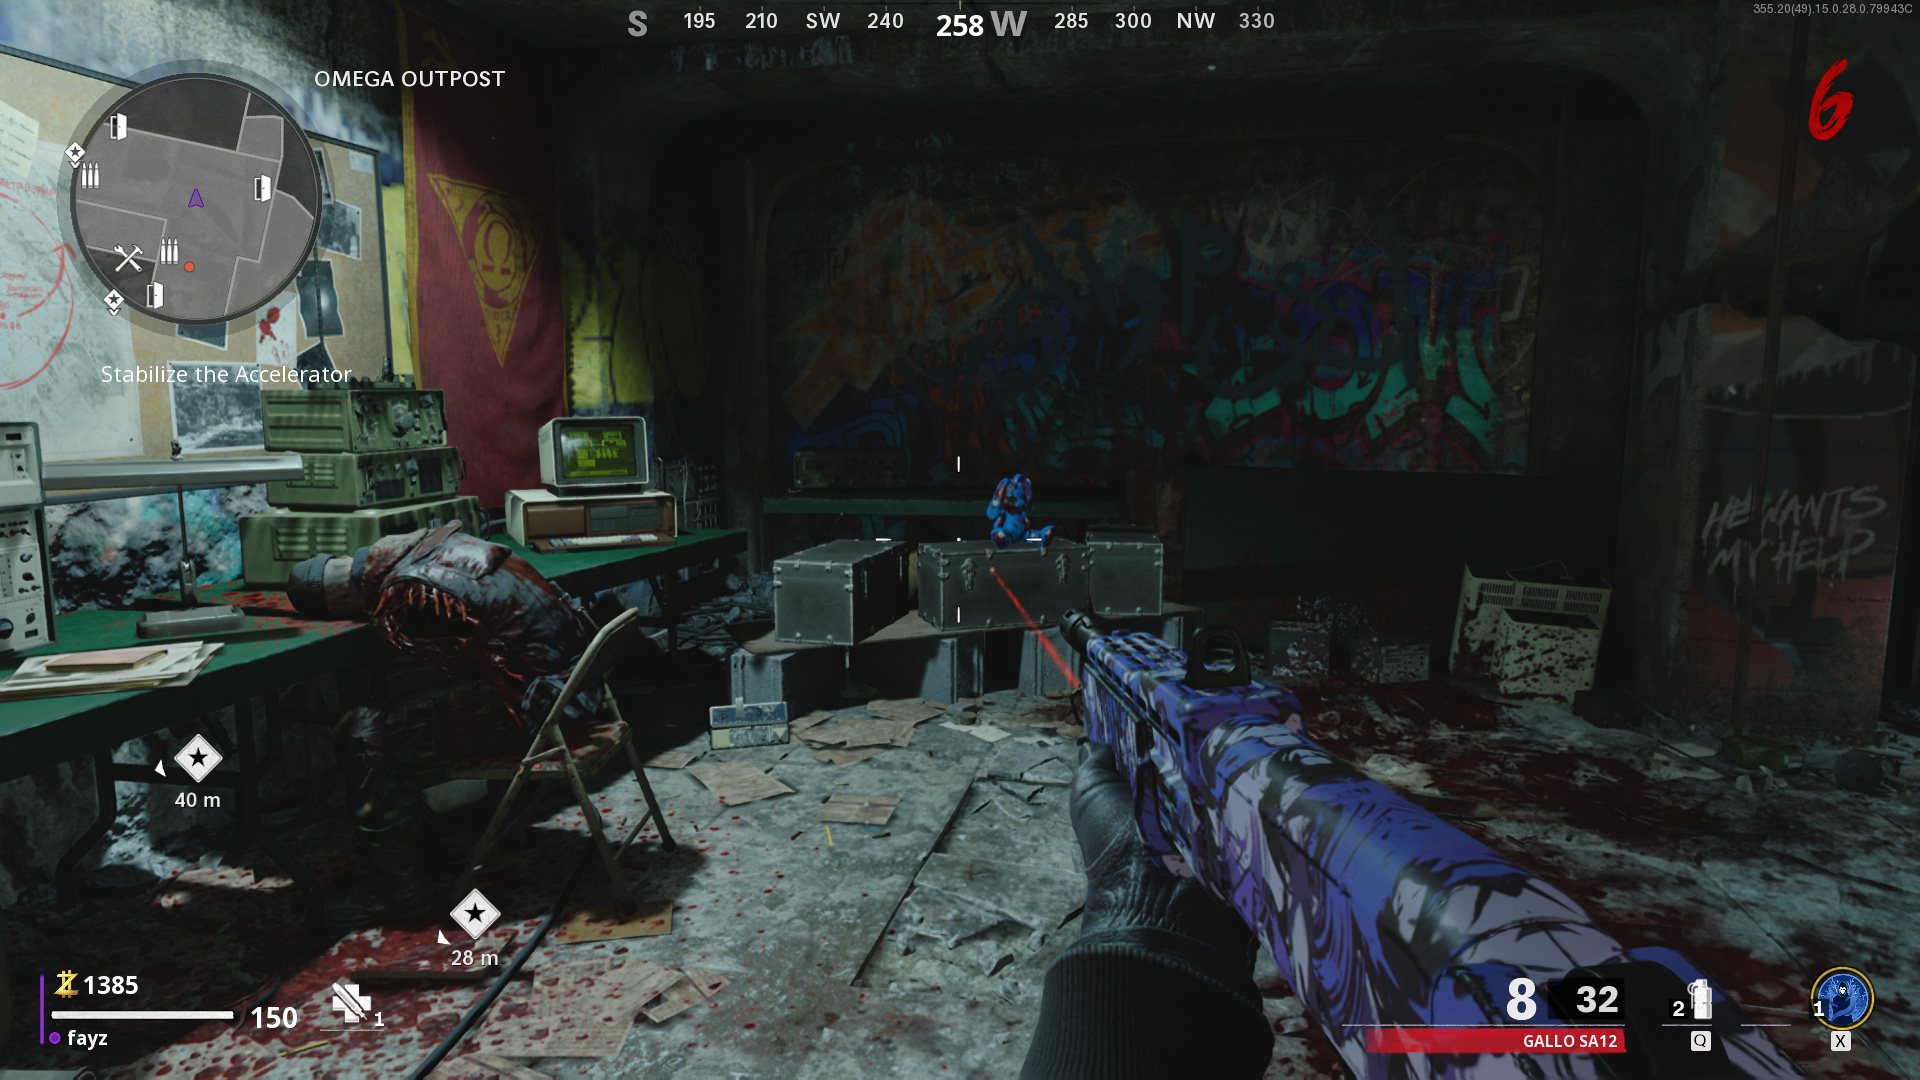 Call of Duty: Emplacements des boîtes mystères dans Black Ops Cold War Zombies - Omega Outpost